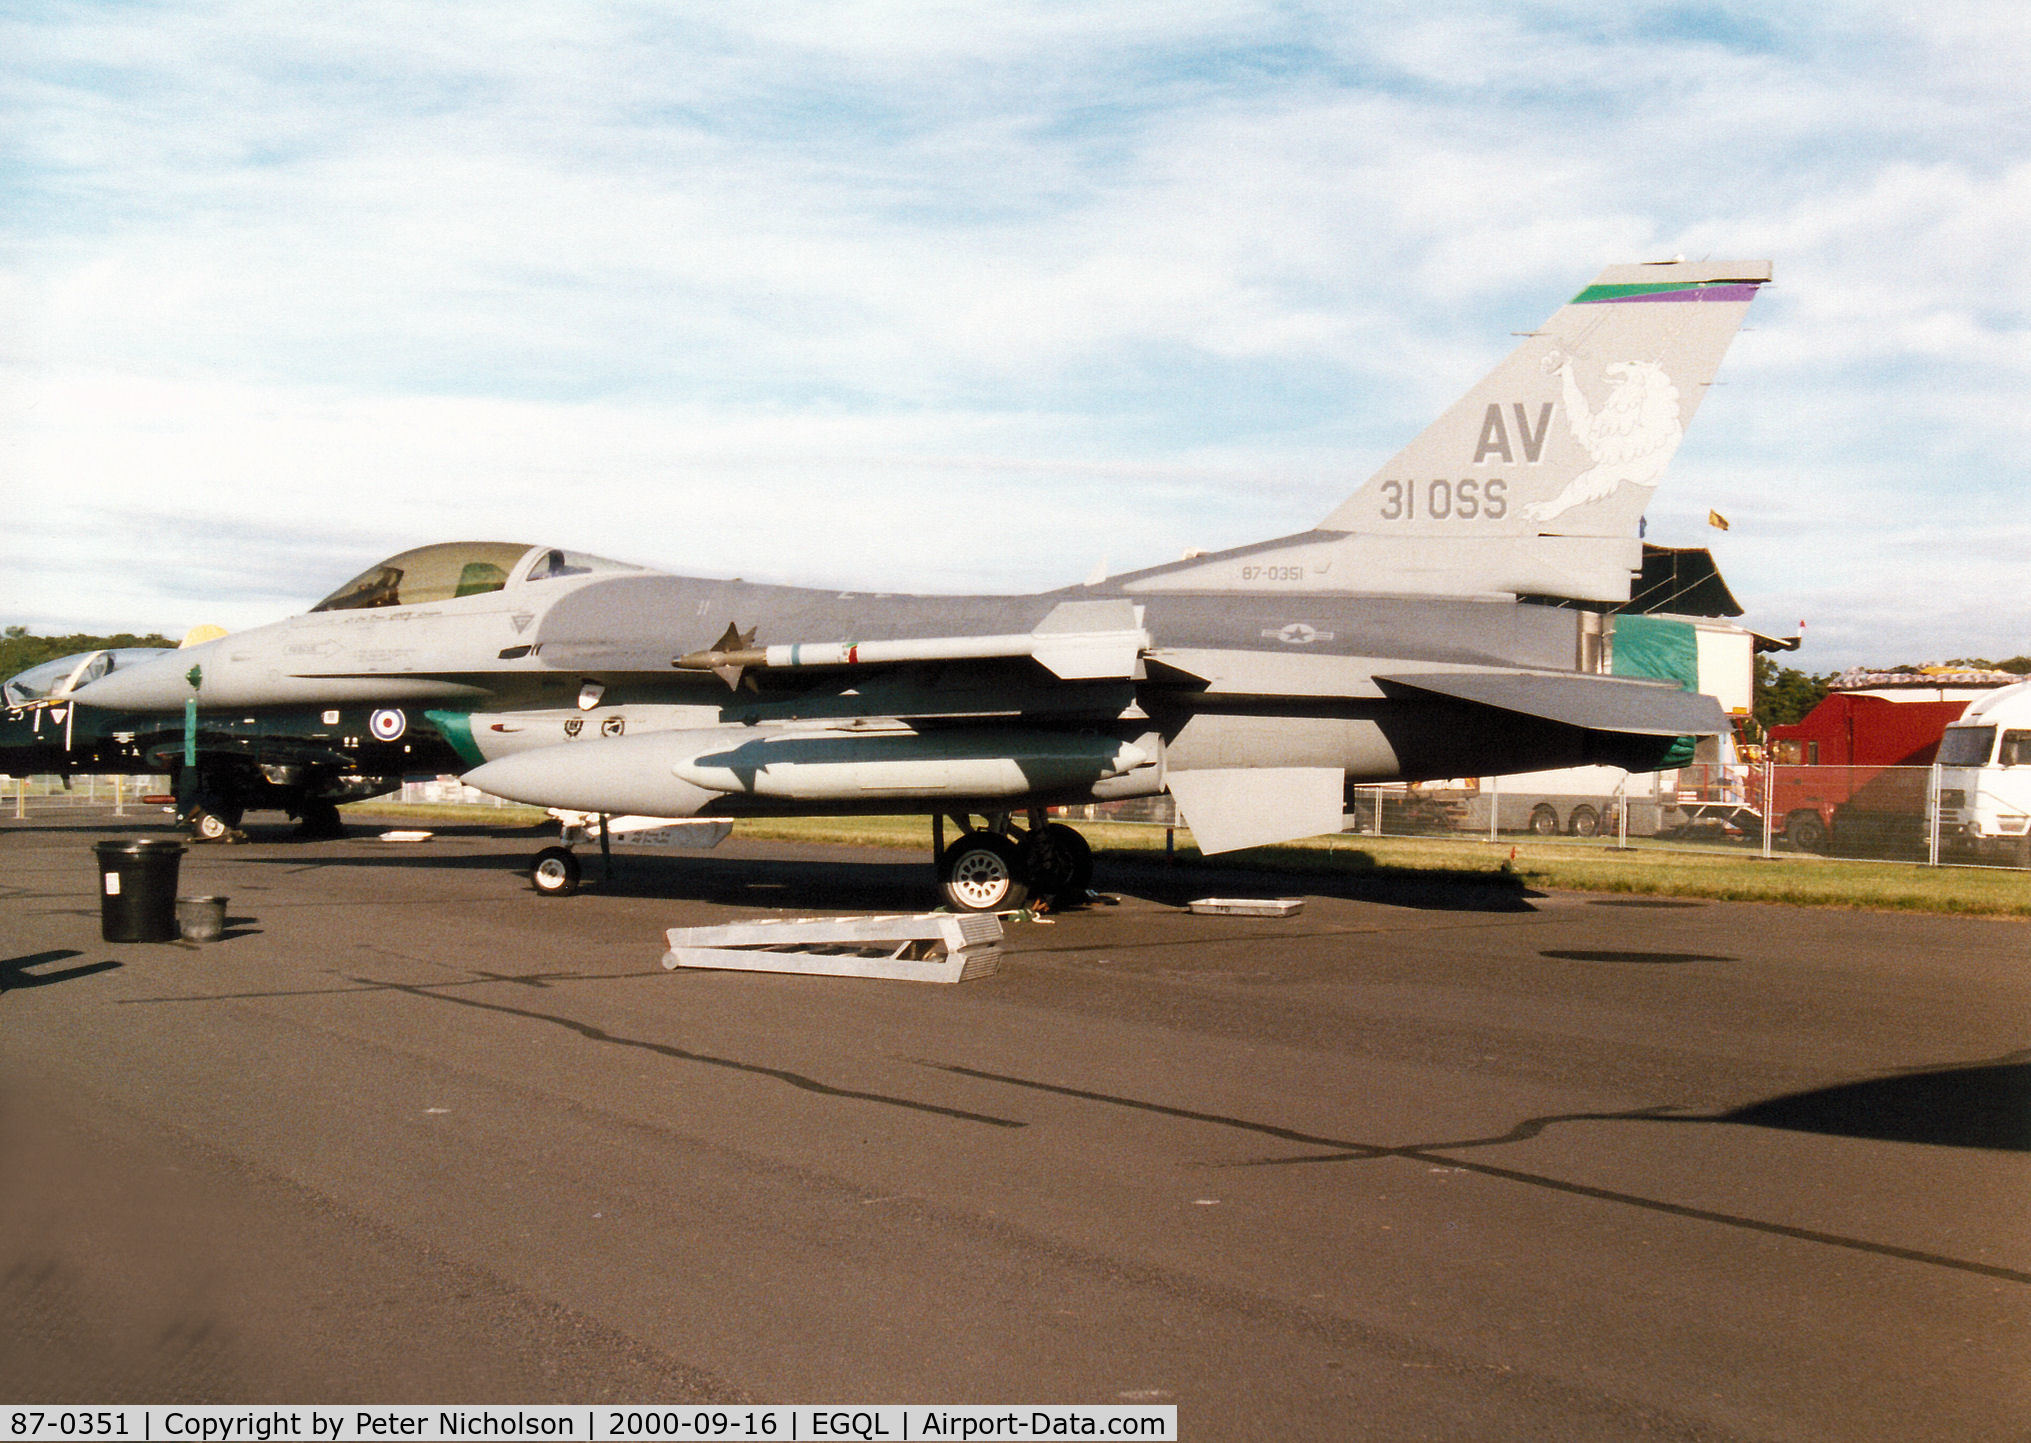 87-0351, 1987 General Dynamics F-16CG Fighting Falcon C/N 1C-2, F-16CG Fighting Falcon, callsign Nickel 02, of 555th Fighter Squadron/31st Fighting Wing based at Aviano on display at the 2000 RAF Leuchars Airshow.